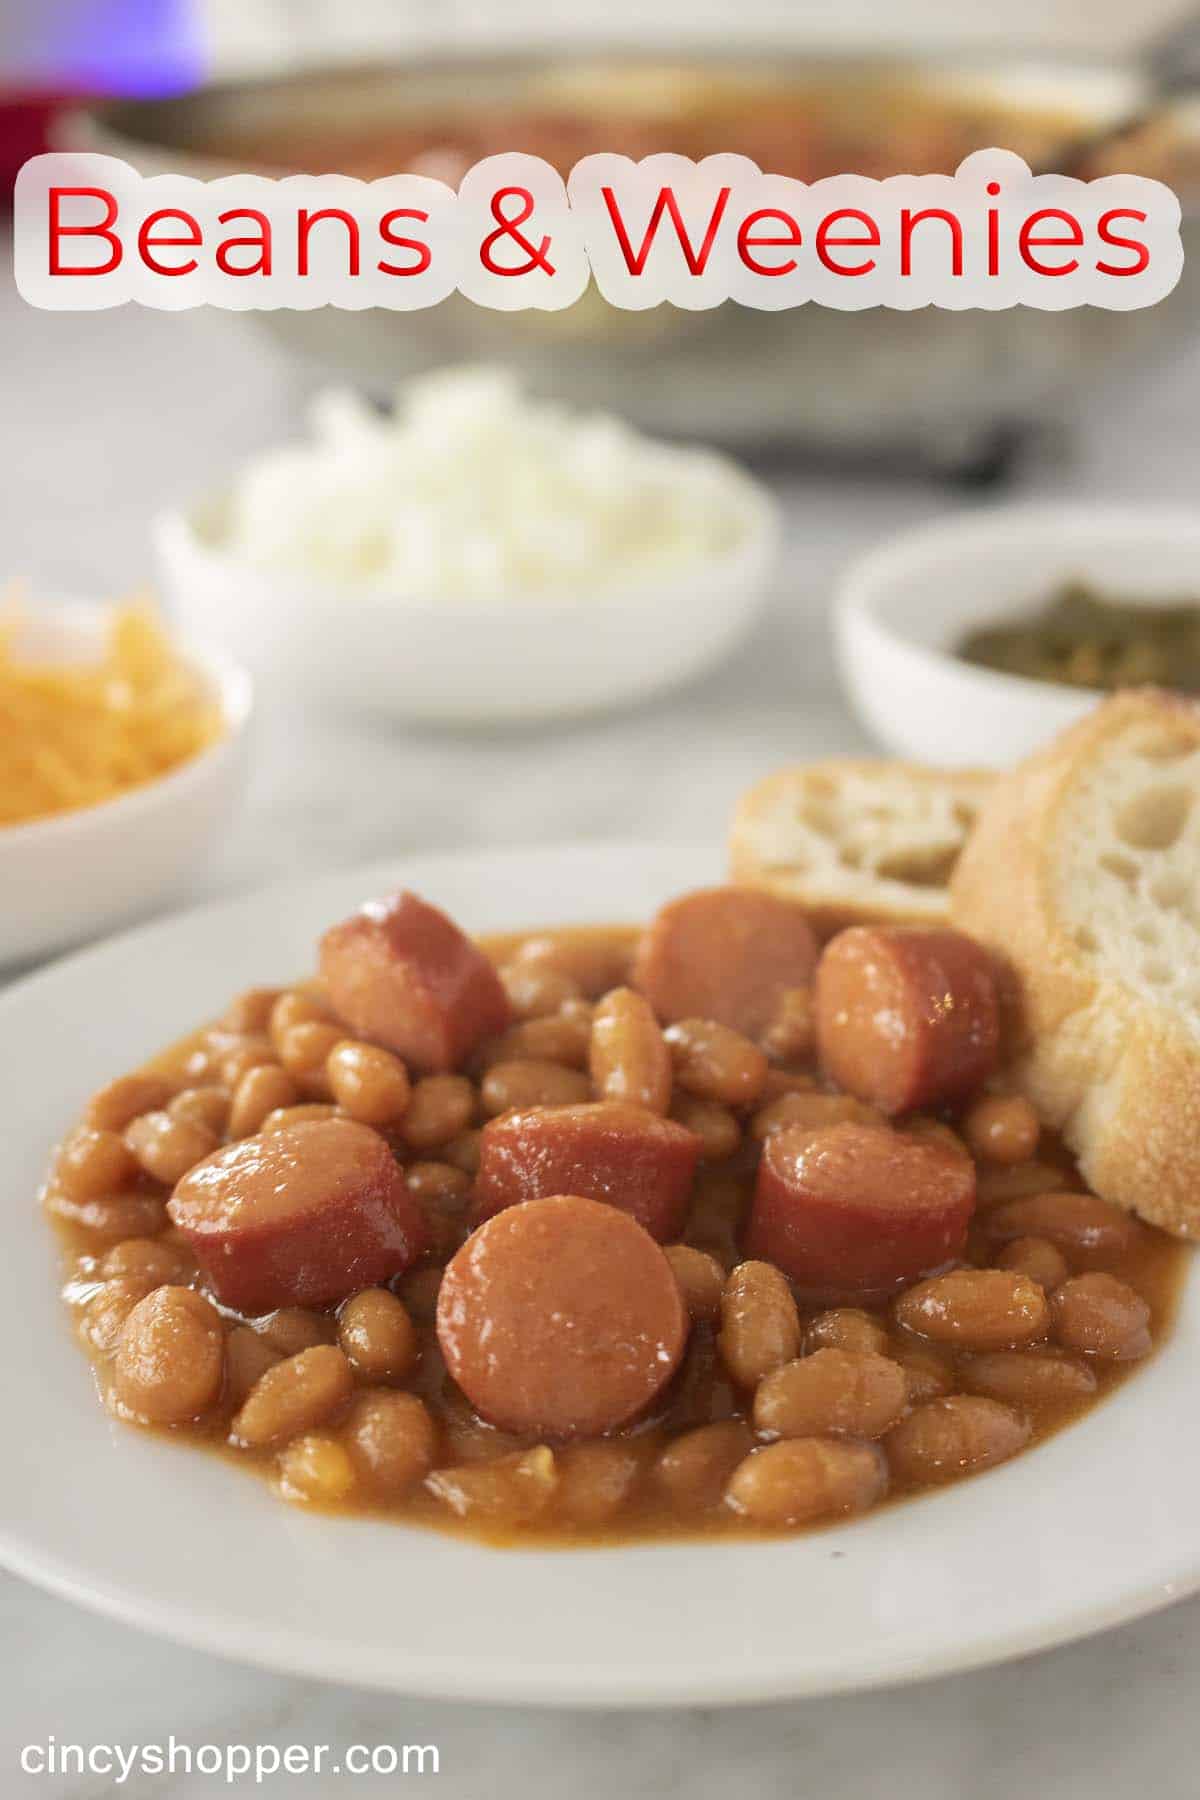 Text on image with plate of Beans & Weenies.